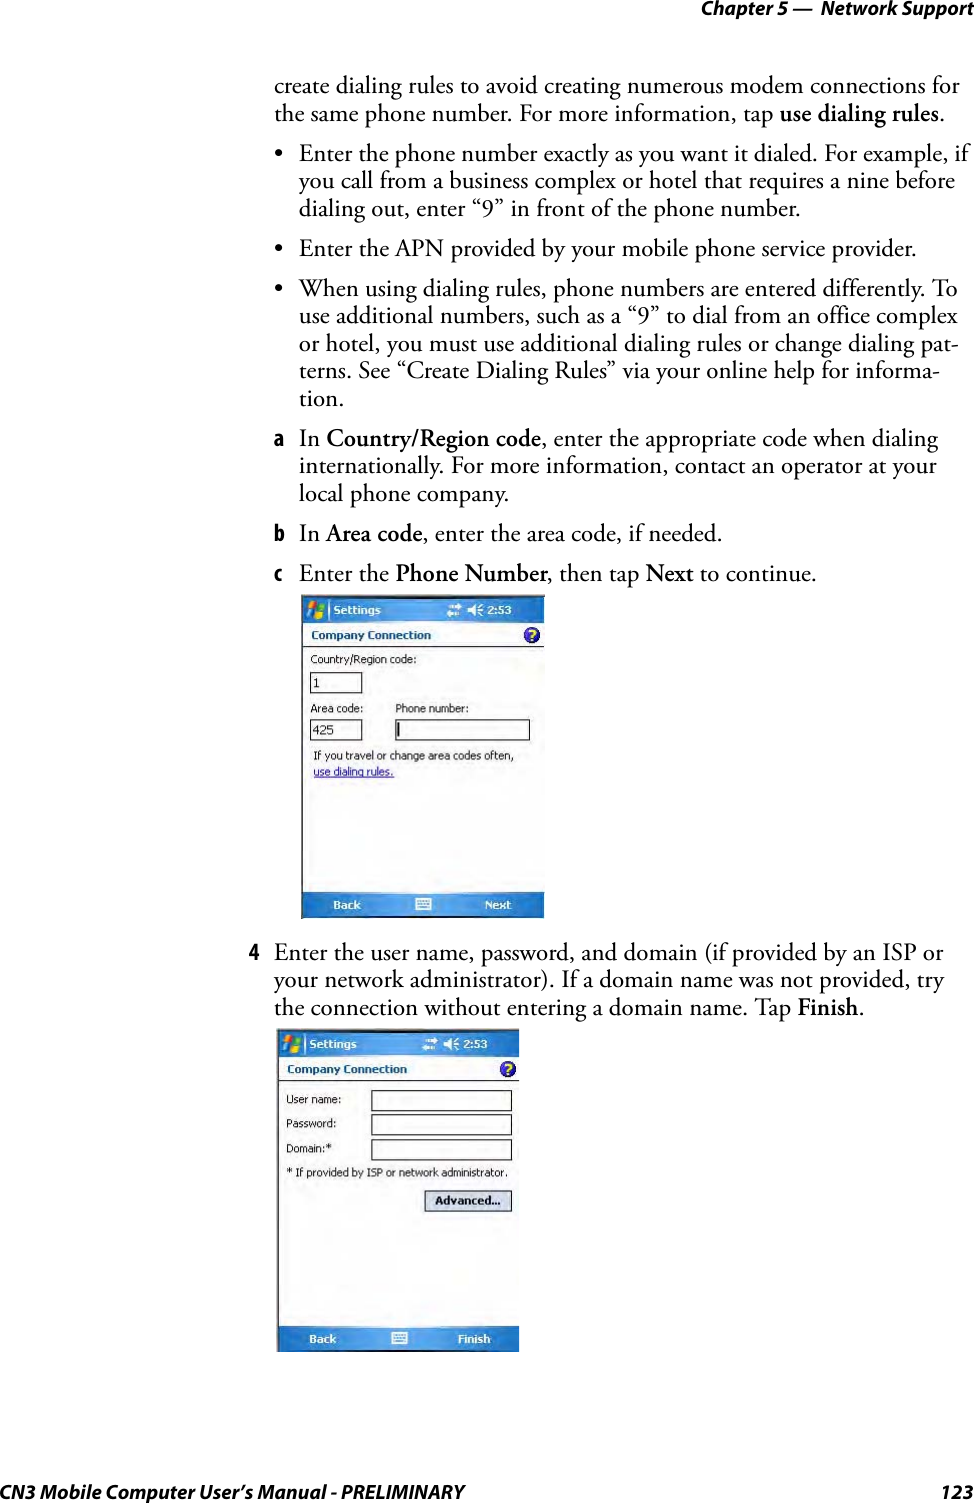 Chapter 5 —  Network SupportCN3 Mobile Computer User’s Manual - PRELIMINARY 123create dialing rules to avoid creating numerous modem connections for the same phone number. For more information, tap use dialing rules.• Enter the phone number exactly as you want it dialed. For example, if you call from a business complex or hotel that requires a nine before dialing out, enter “9” in front of the phone number.• Enter the APN provided by your mobile phone service provider.• When using dialing rules, phone numbers are entered differently. To use additional numbers, such as a “9” to dial from an office complex or hotel, you must use additional dialing rules or change dialing pat-terns. See “Create Dialing Rules” via your online help for informa-tion.aIn Country/Region code, enter the appropriate code when dialing internationally. For more information, contact an operator at your local phone company.bIn Area code, enter the area code, if needed.cEnter the Phone Number, then tap Next to continue.4Enter the user name, password, and domain (if provided by an ISP or your network administrator). If a domain name was not provided, try the connection without entering a domain name. Tap Finish.